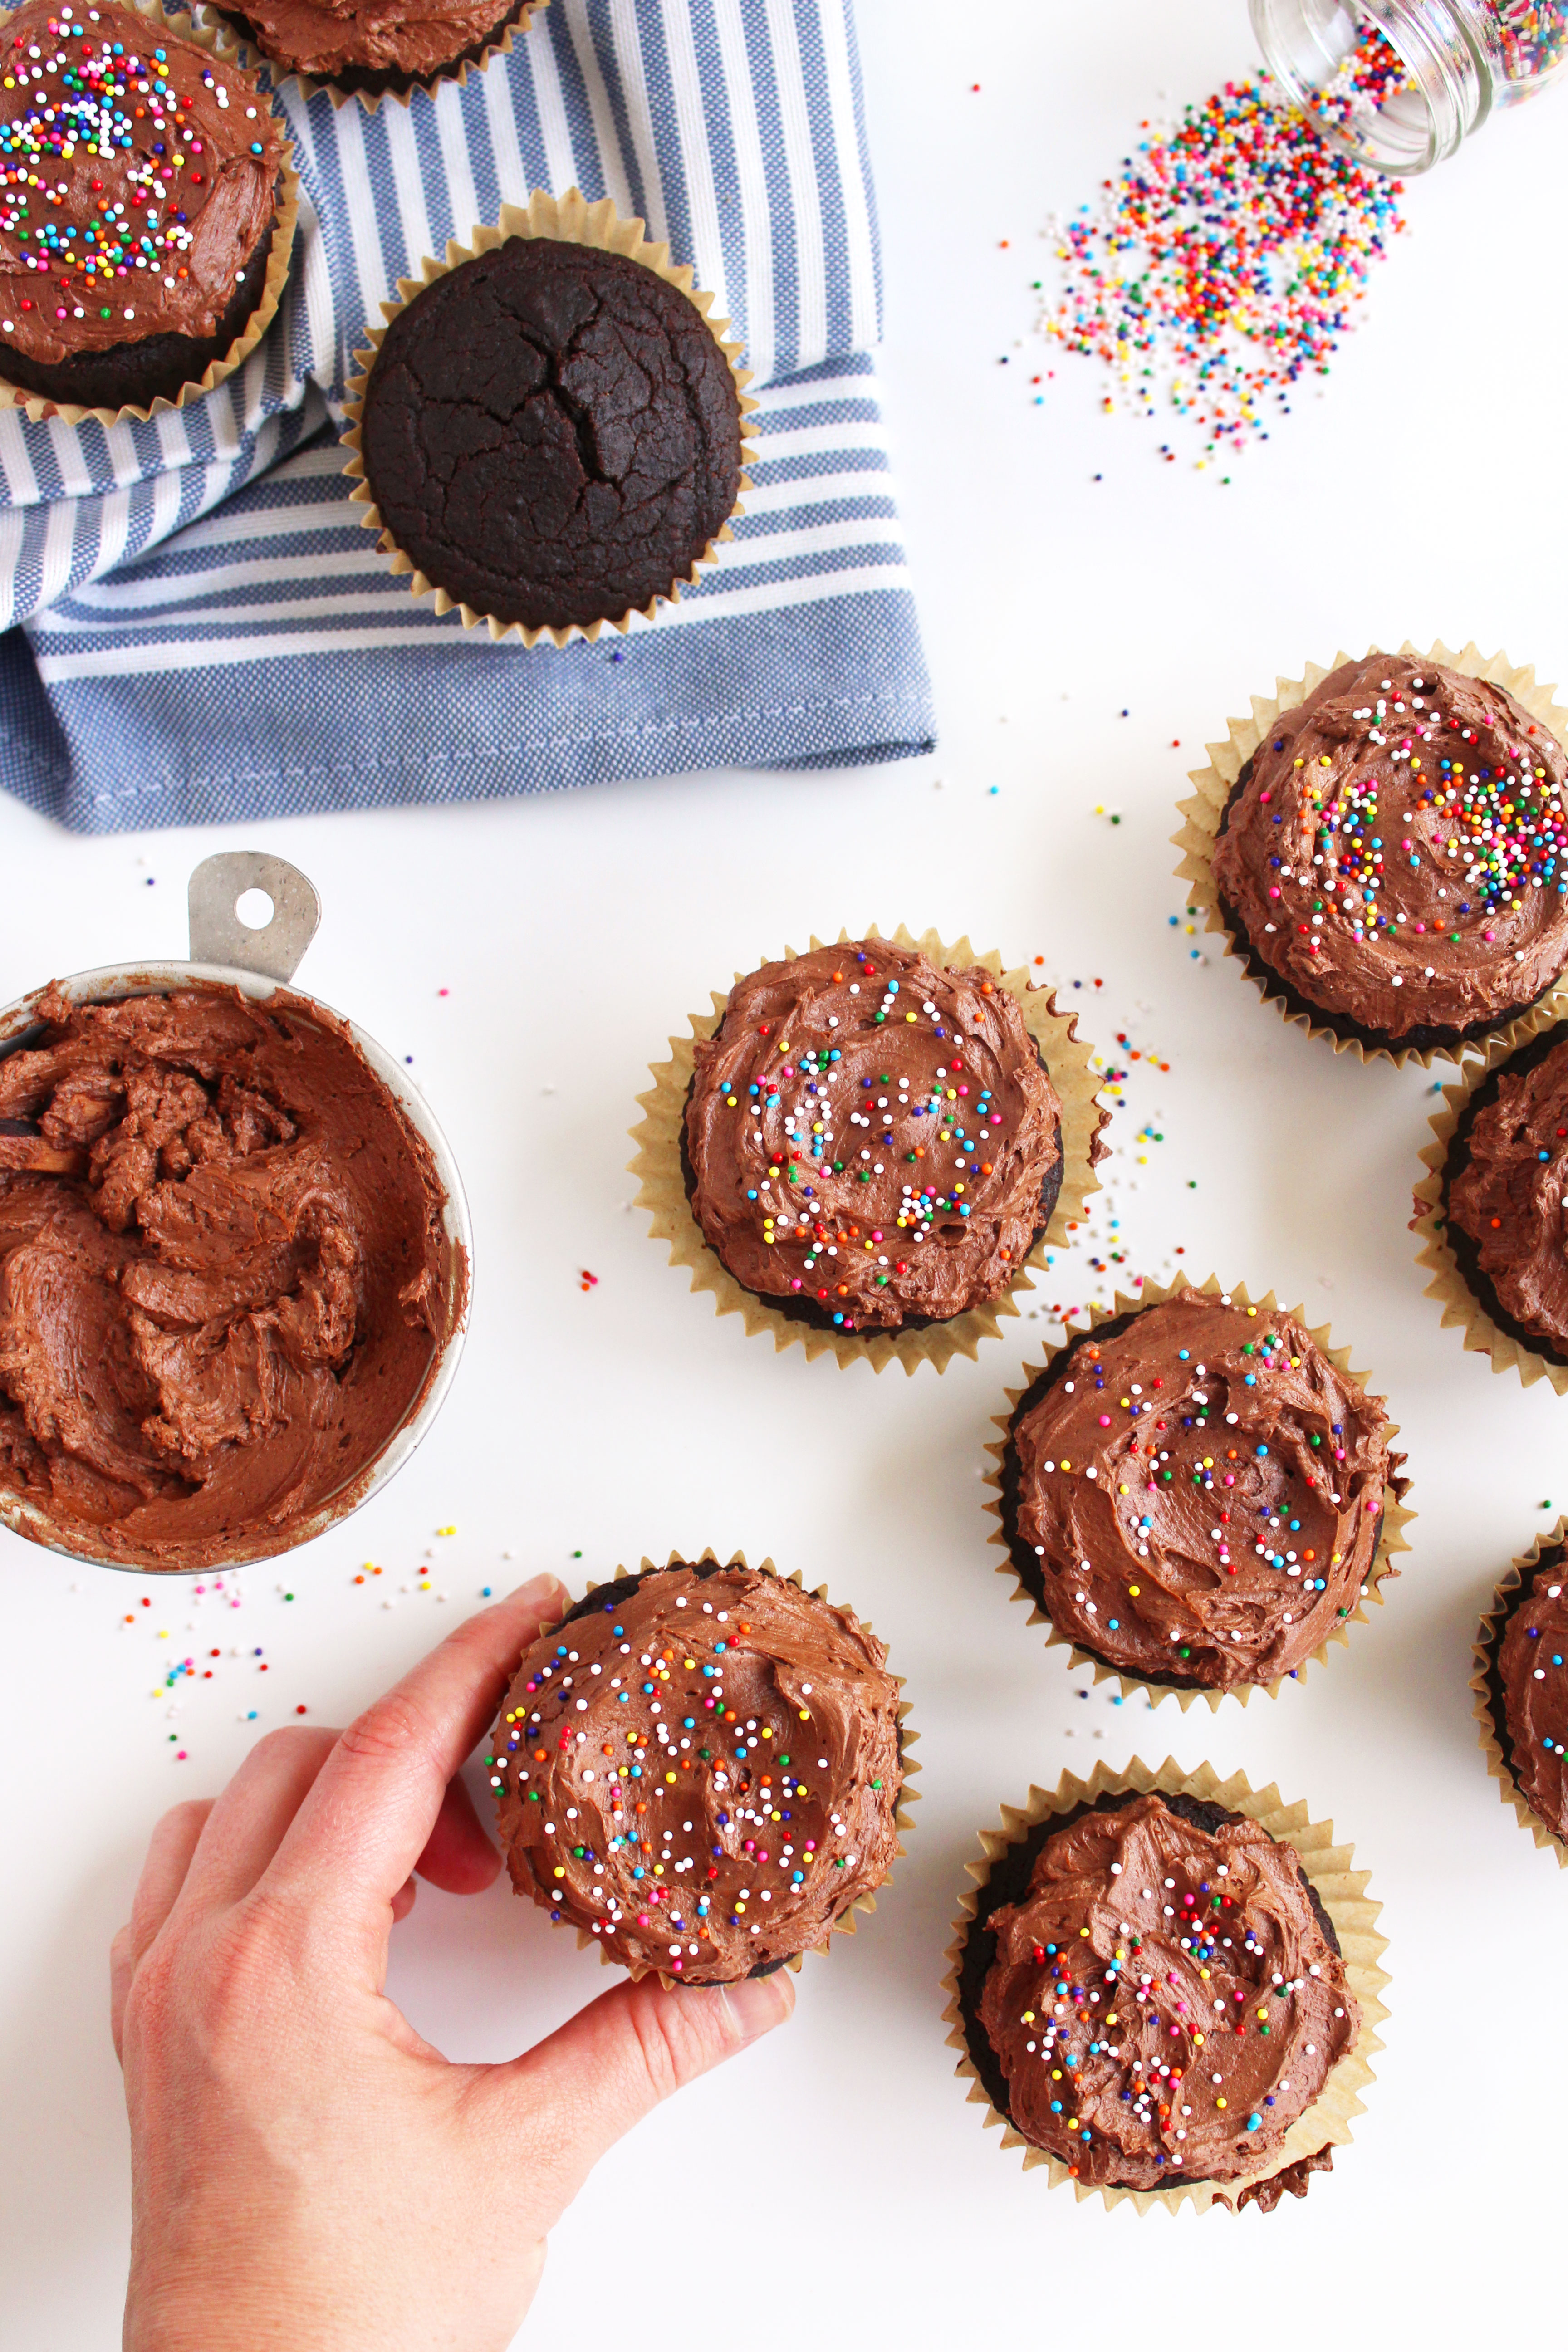 Vegan Chocolate Cupcakes (GF)! A cupcake worthy of a celebration - super chocolatey, moist, & topped with a to-die-for fudge frosting! #vegan #glutenfree #cupcakes | Peachandthecobbler.com